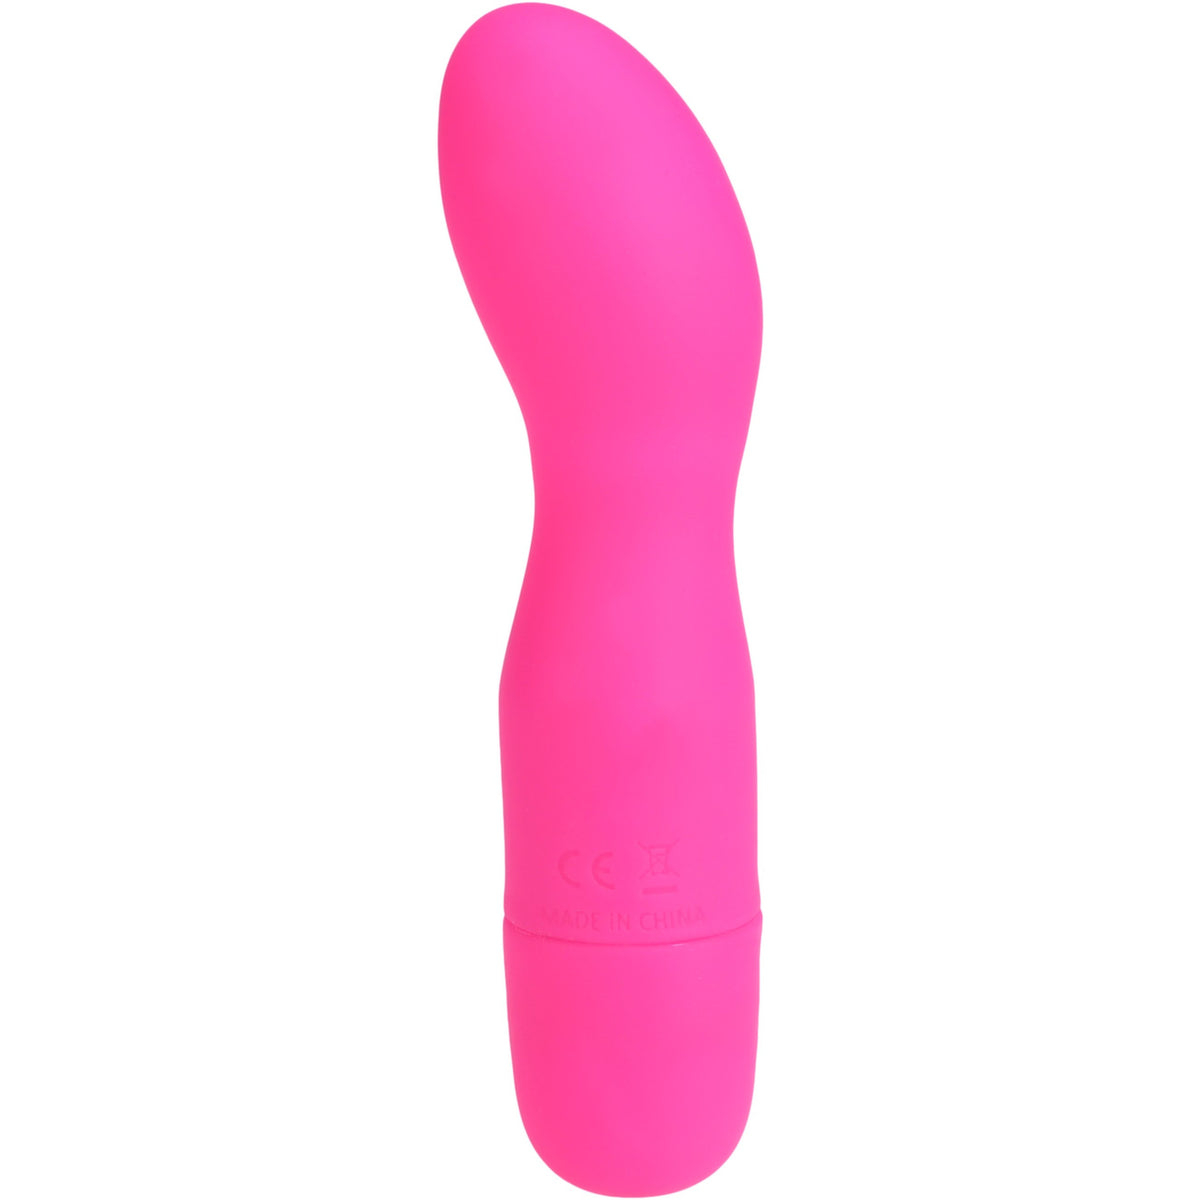 NMC First Night 5 inch Silicone 10 Function G-Spot Vibe - Pink